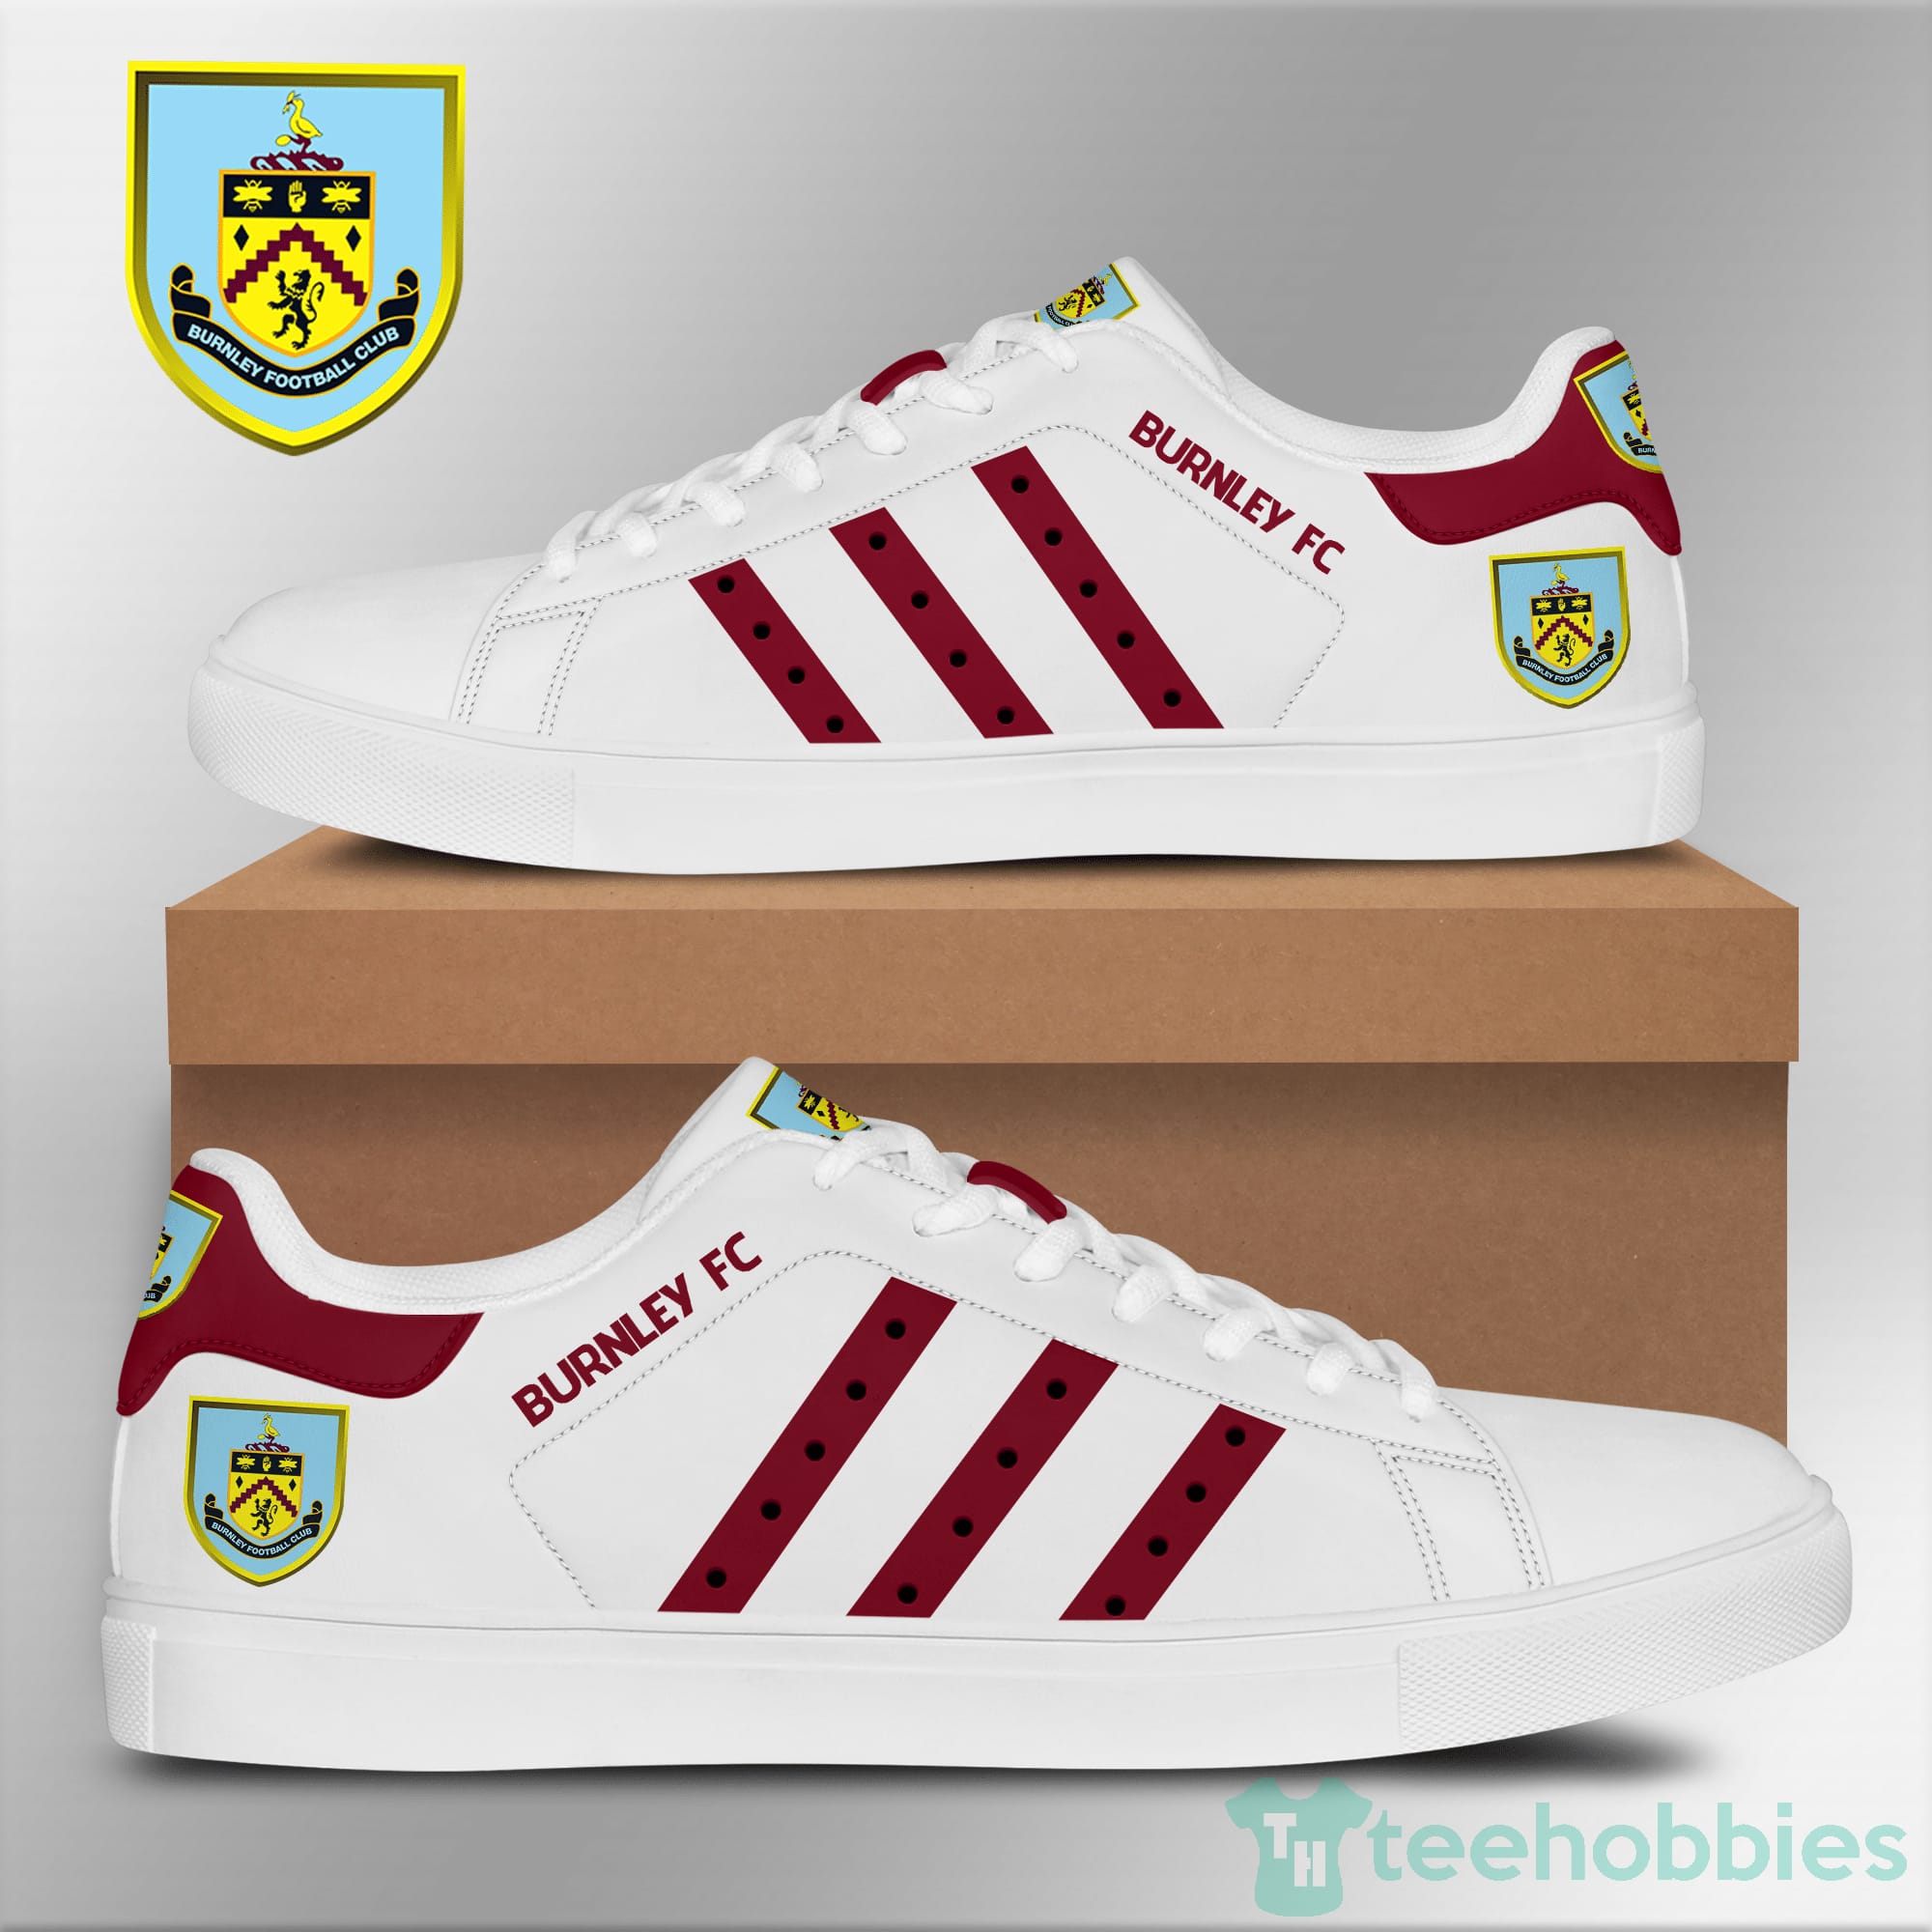 Burnley F.C White Low Top Skate Shoes Product photo 1